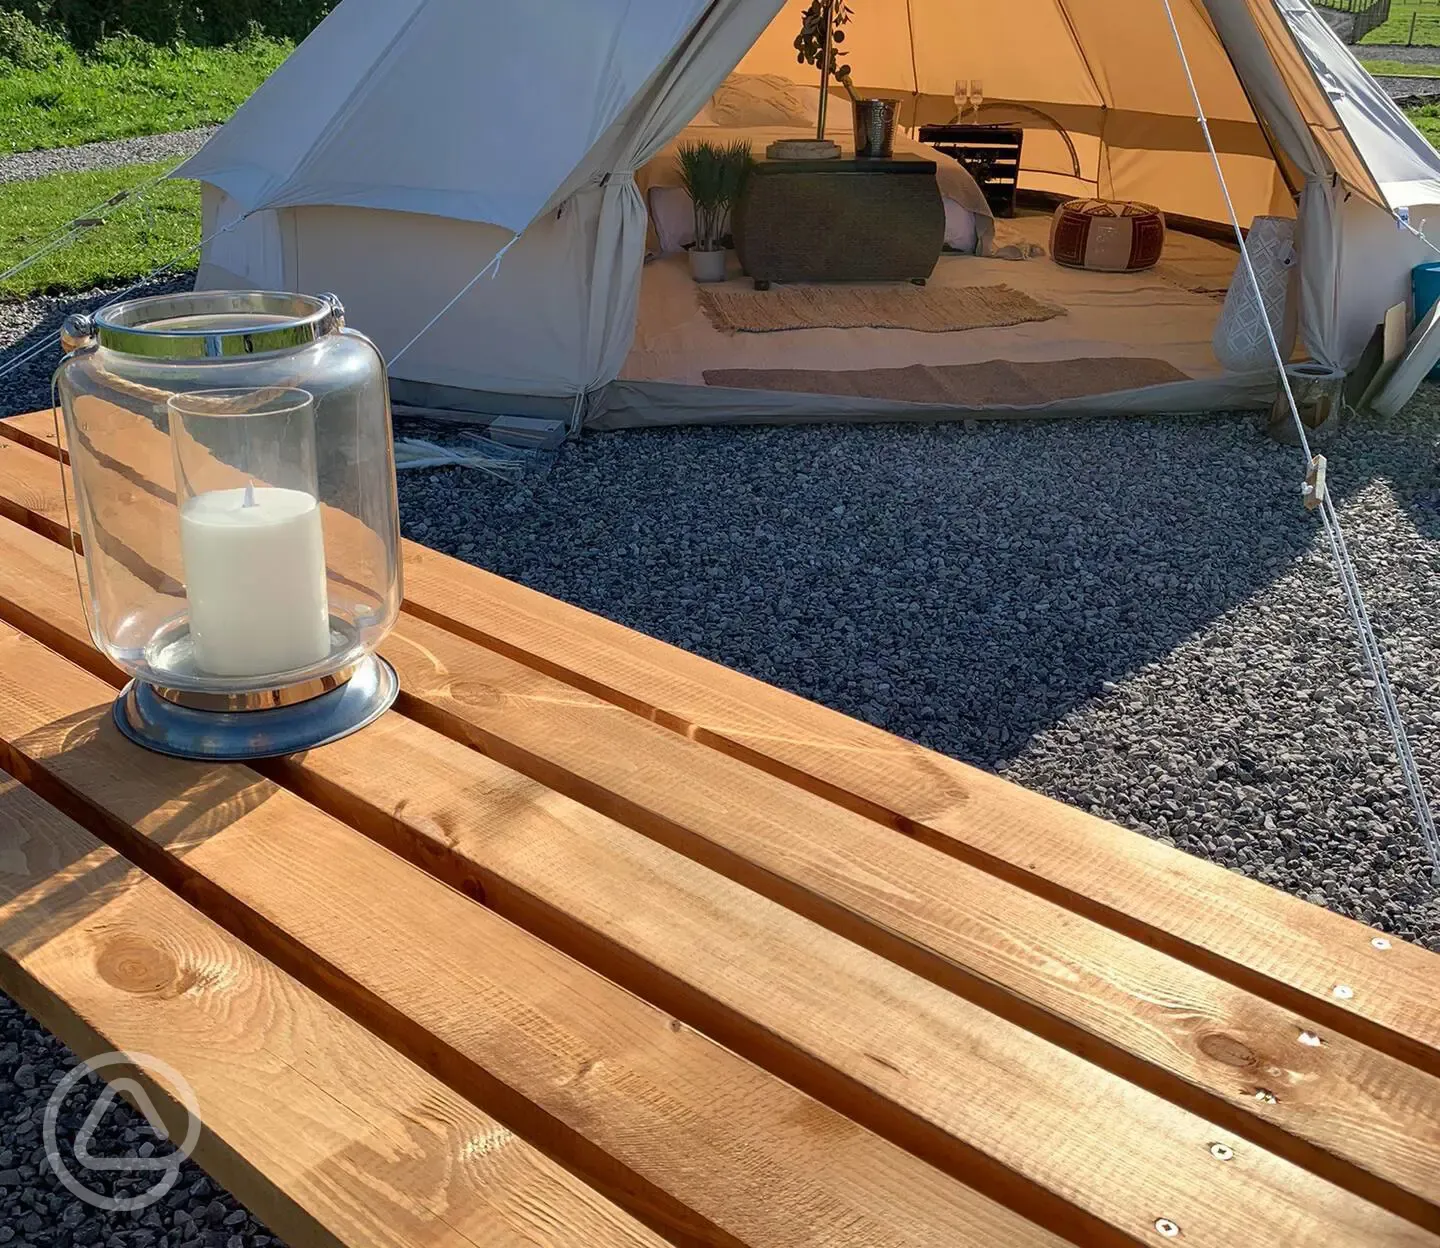 Bell tent outside